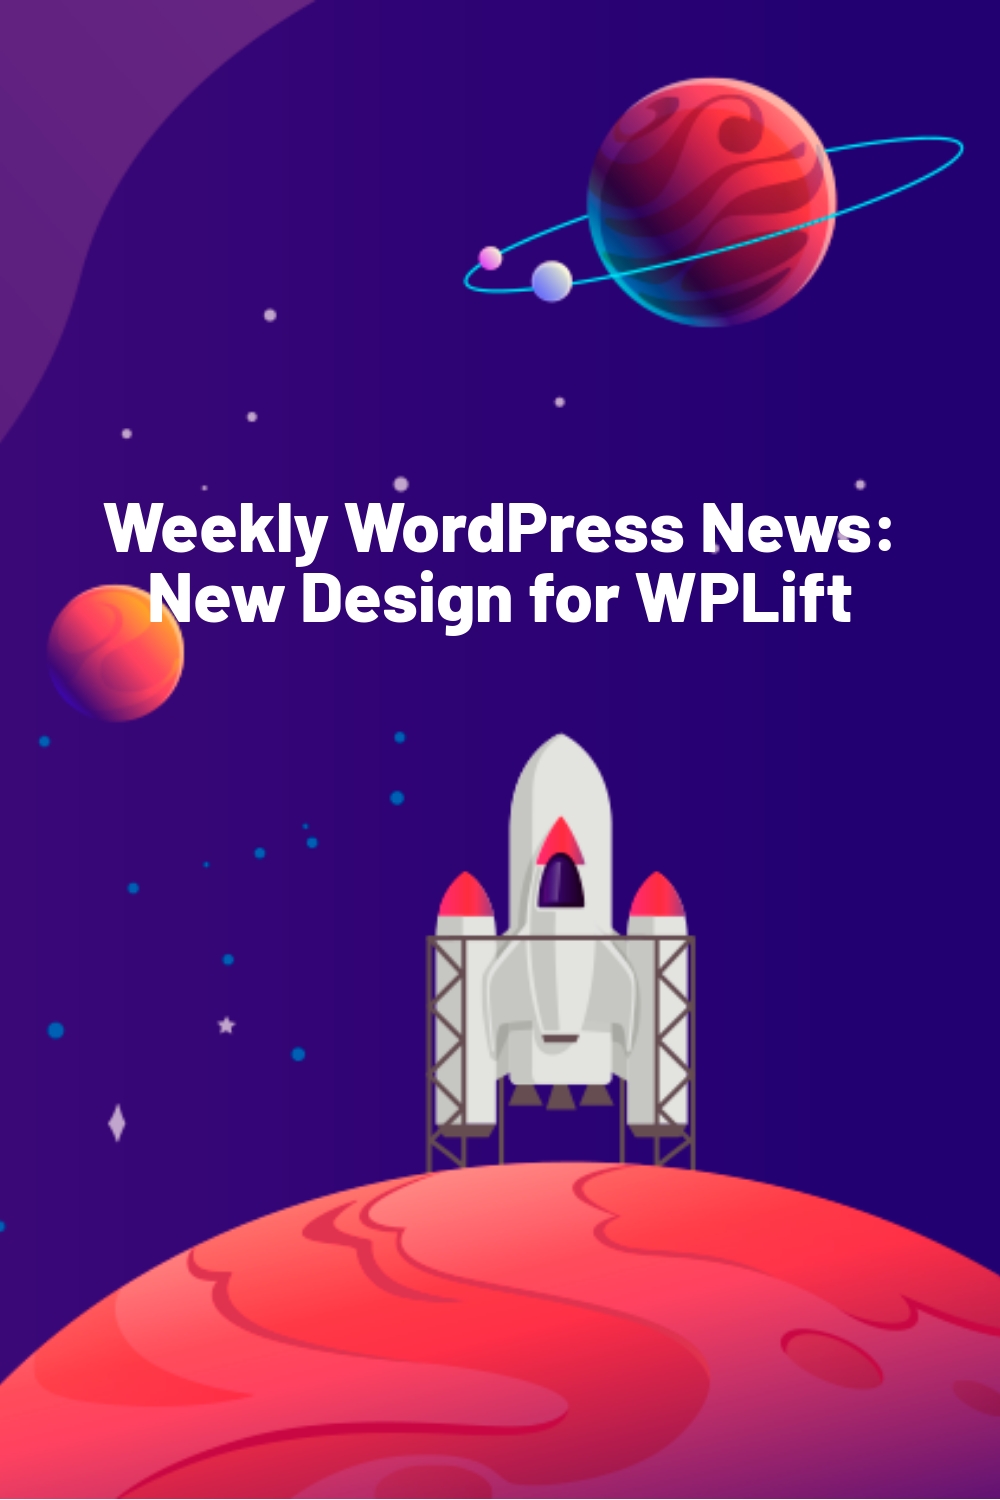 Weekly WordPress News: New Design for WPLift